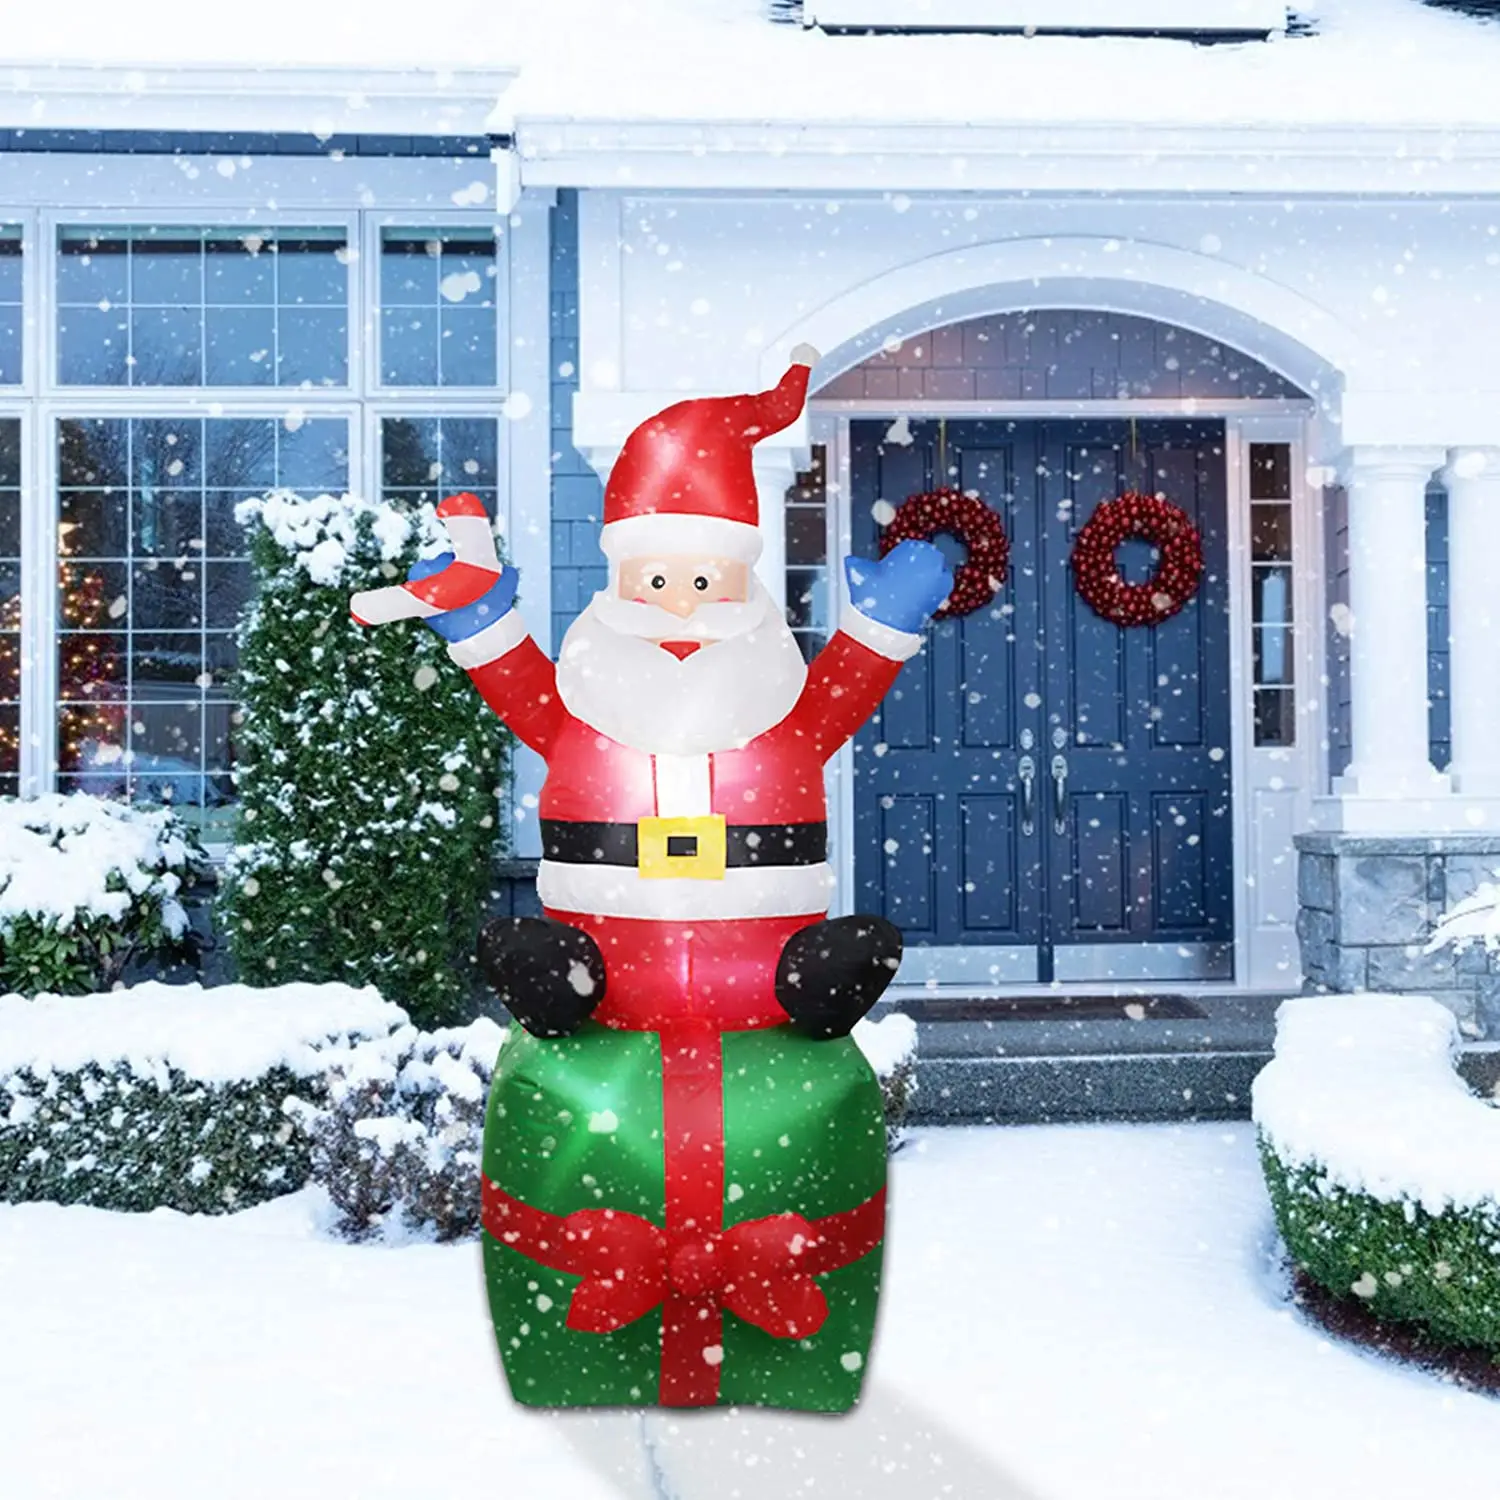 

Christmas Lighted Inflatable Santa Claus Giant LED Light Toy Decoration Yard Prop For Natal Navidad Xmas GardenParties Ornaments